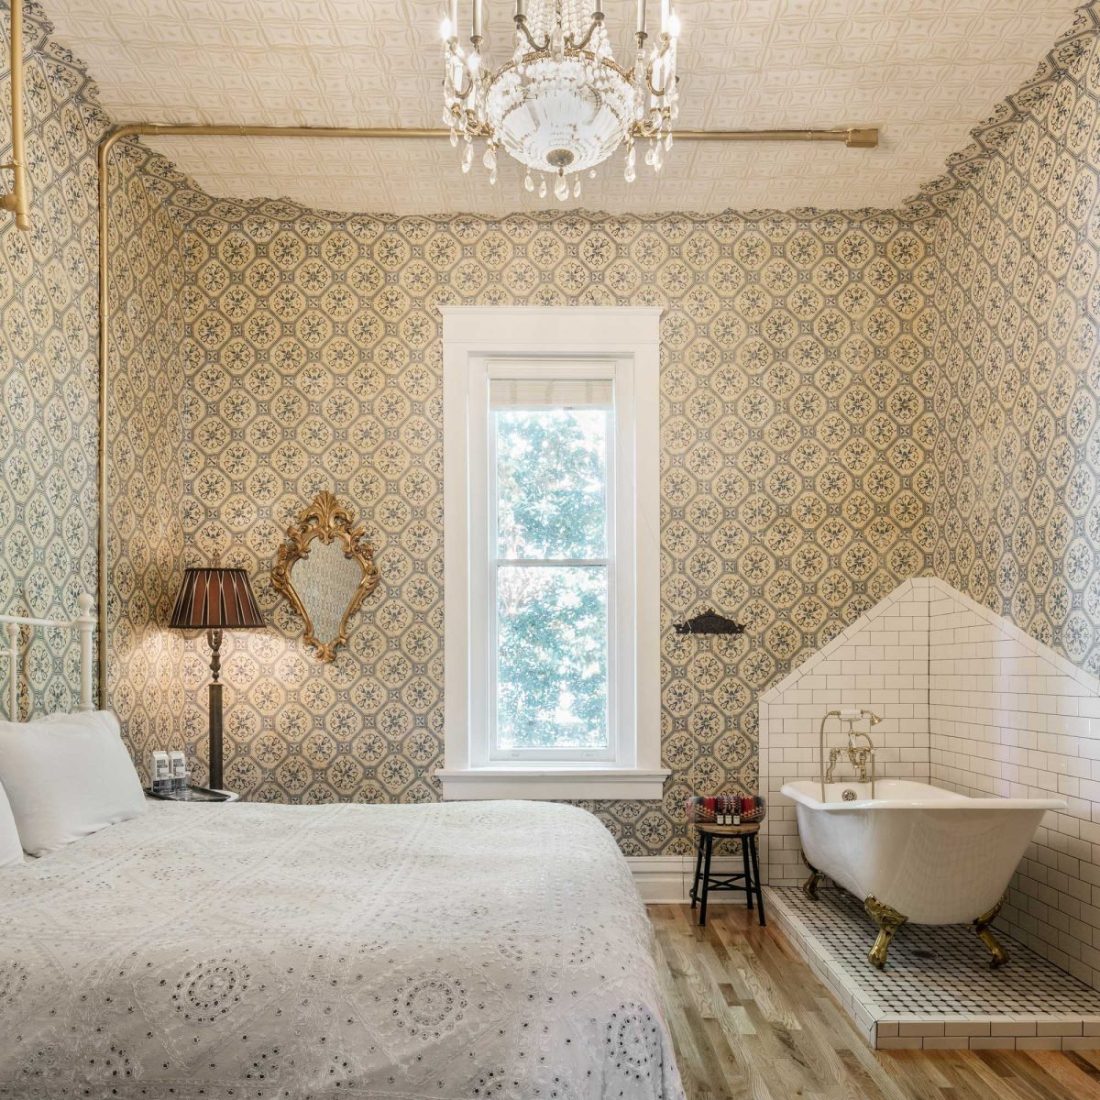 The Victorian Room inside Urban Cowboy Nashville, lit with a warm light of the chandelier. A king sized bed is placed in the middle, just across from a tiled area holding a claw foot bathtub.